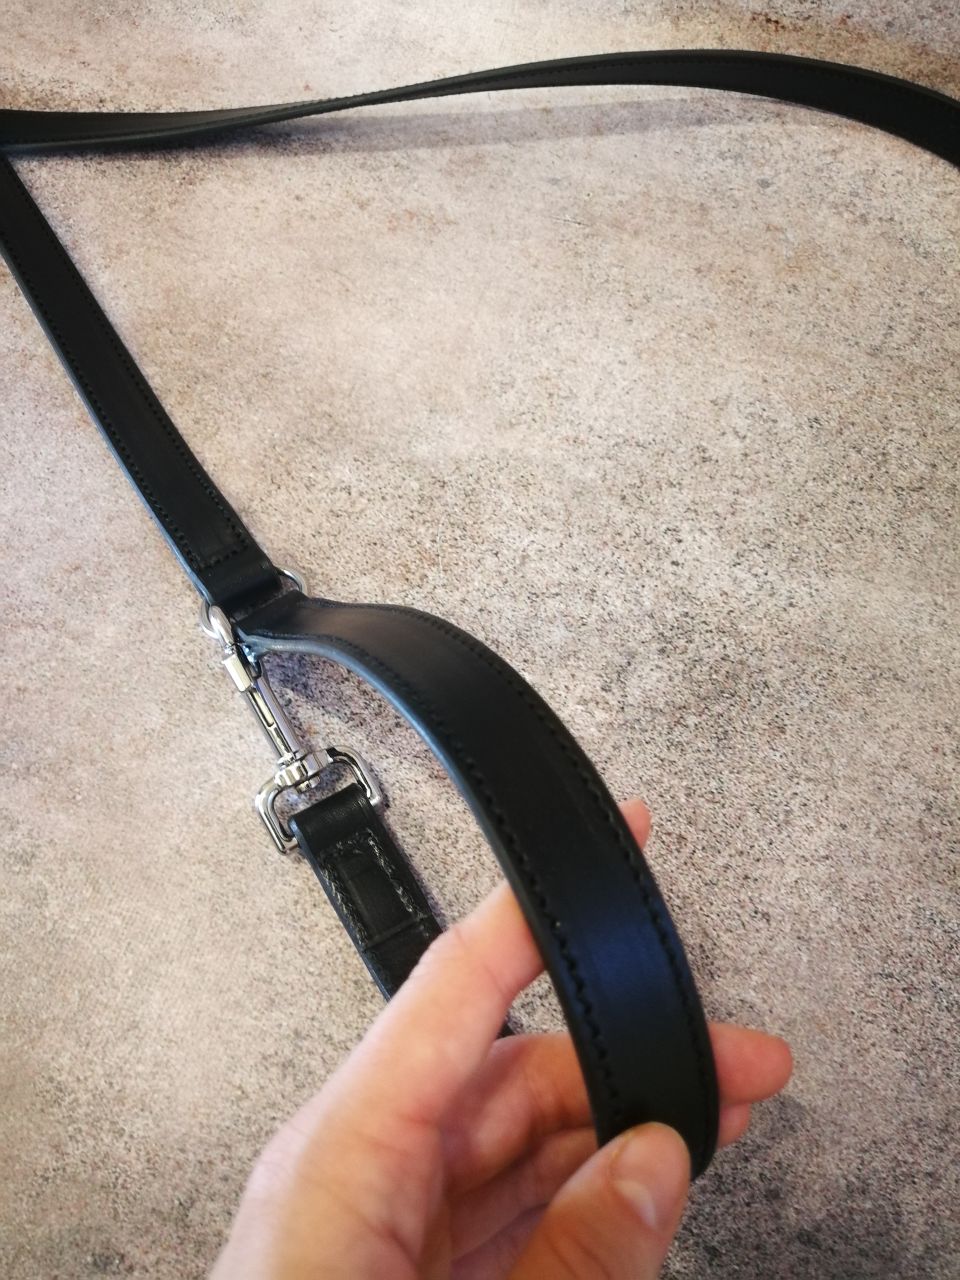 Multifunctional Leather Dog leash 6 in one